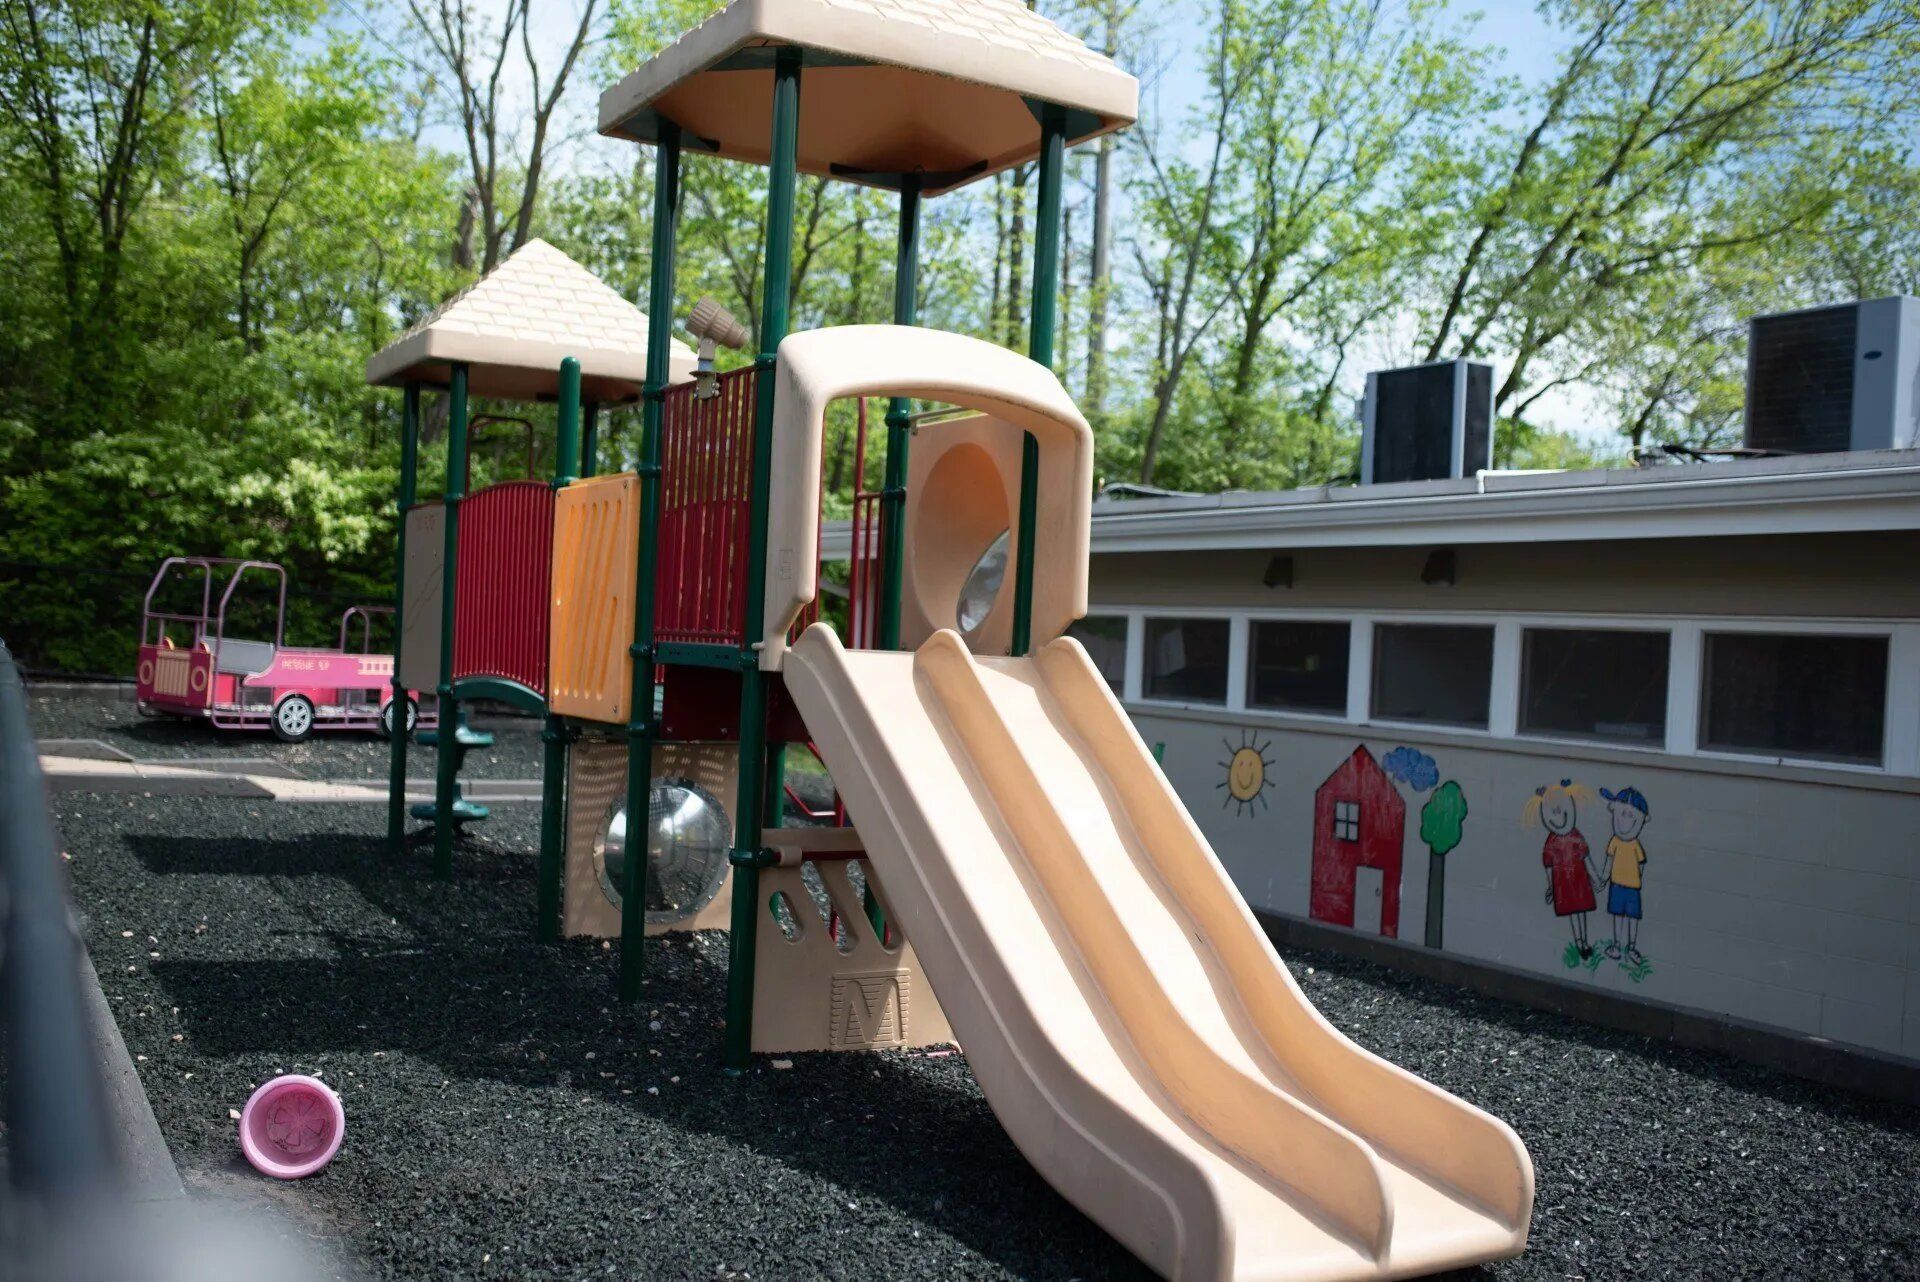 Playground with multiple slides